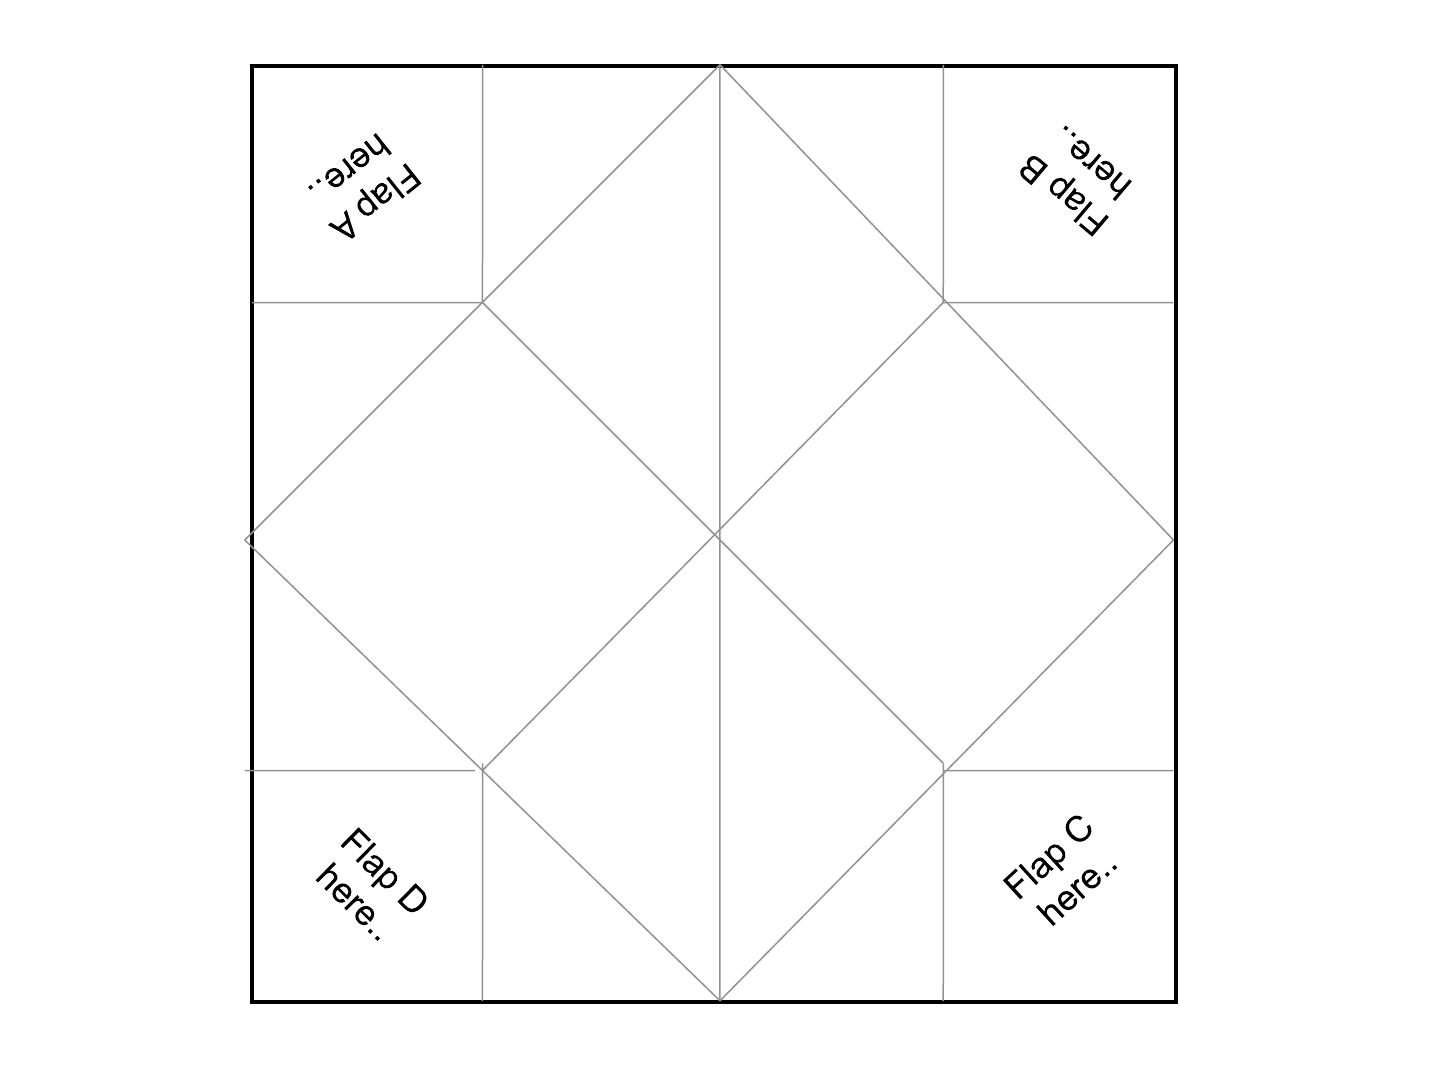 Free Cootie Catcher Template ppt 76KB 7 Page(s)